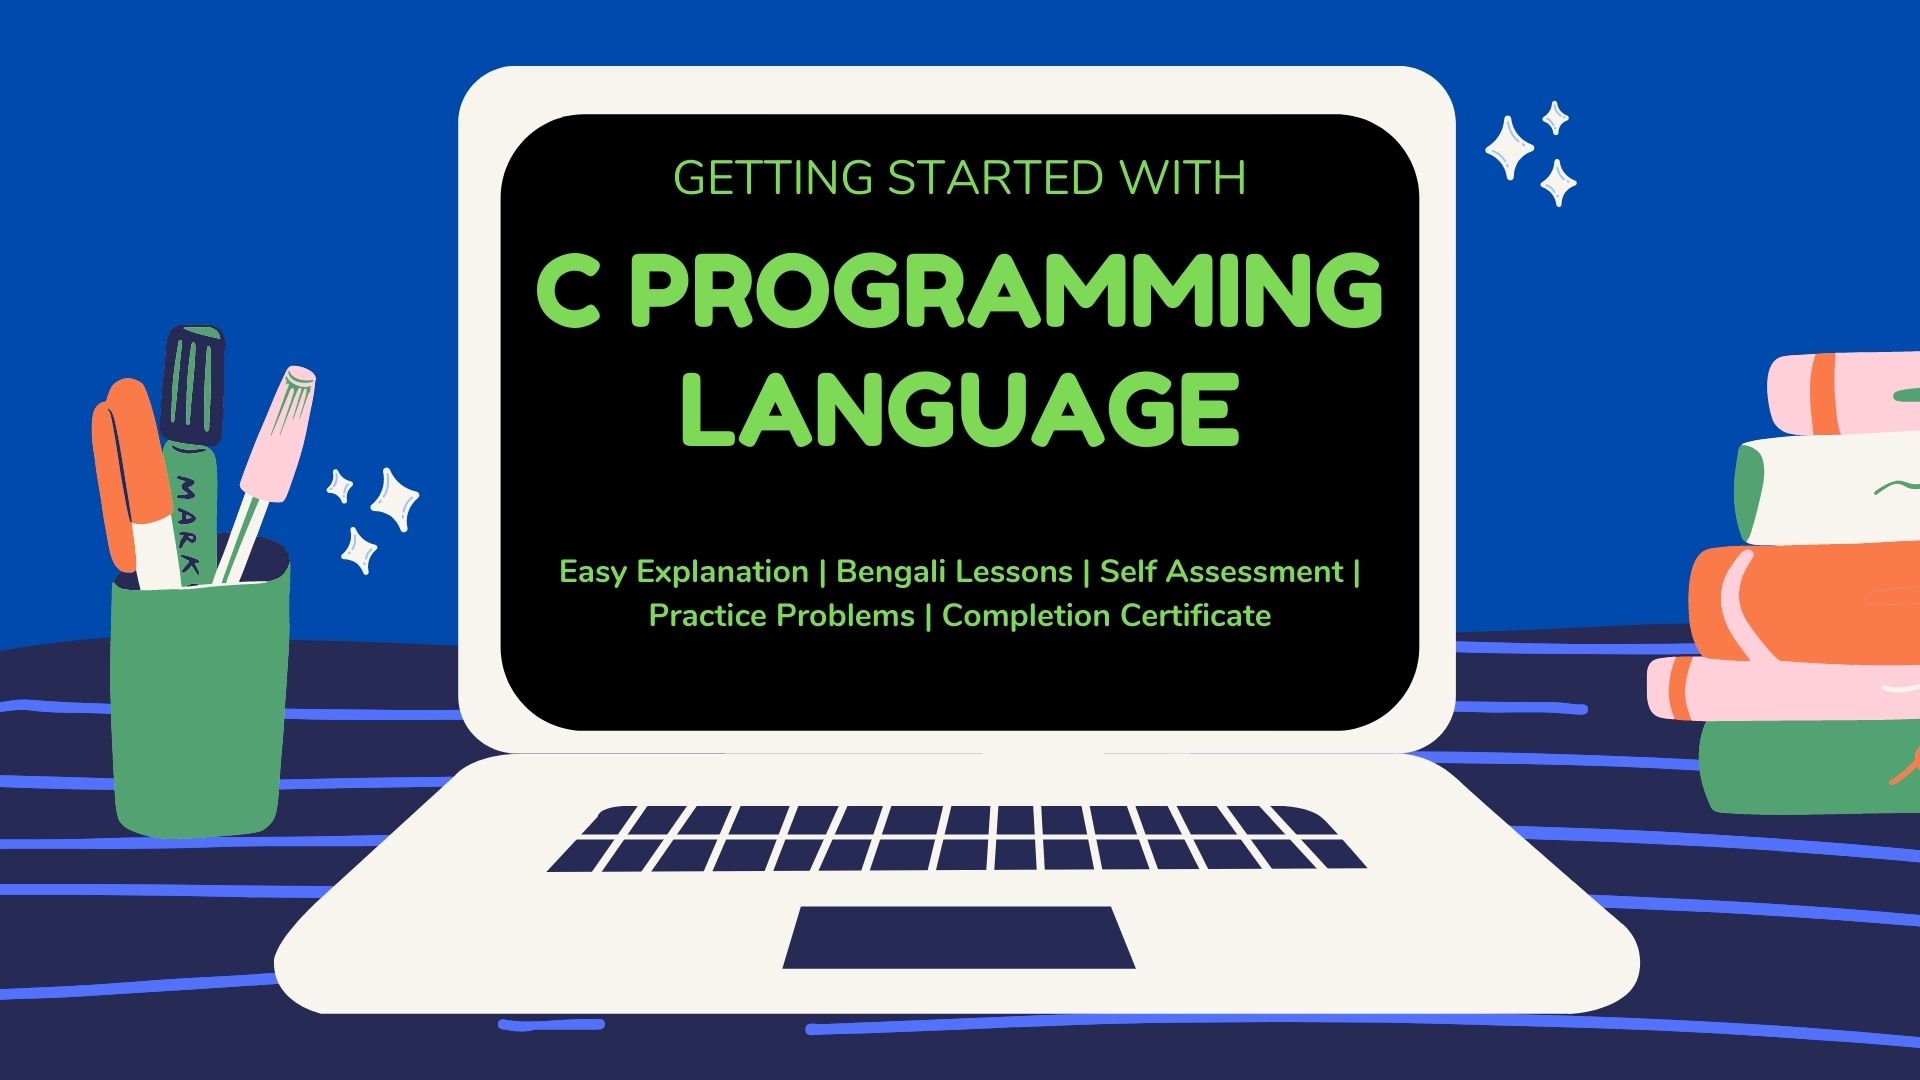 Getting Started with C Programming Language Course Image GoEdu